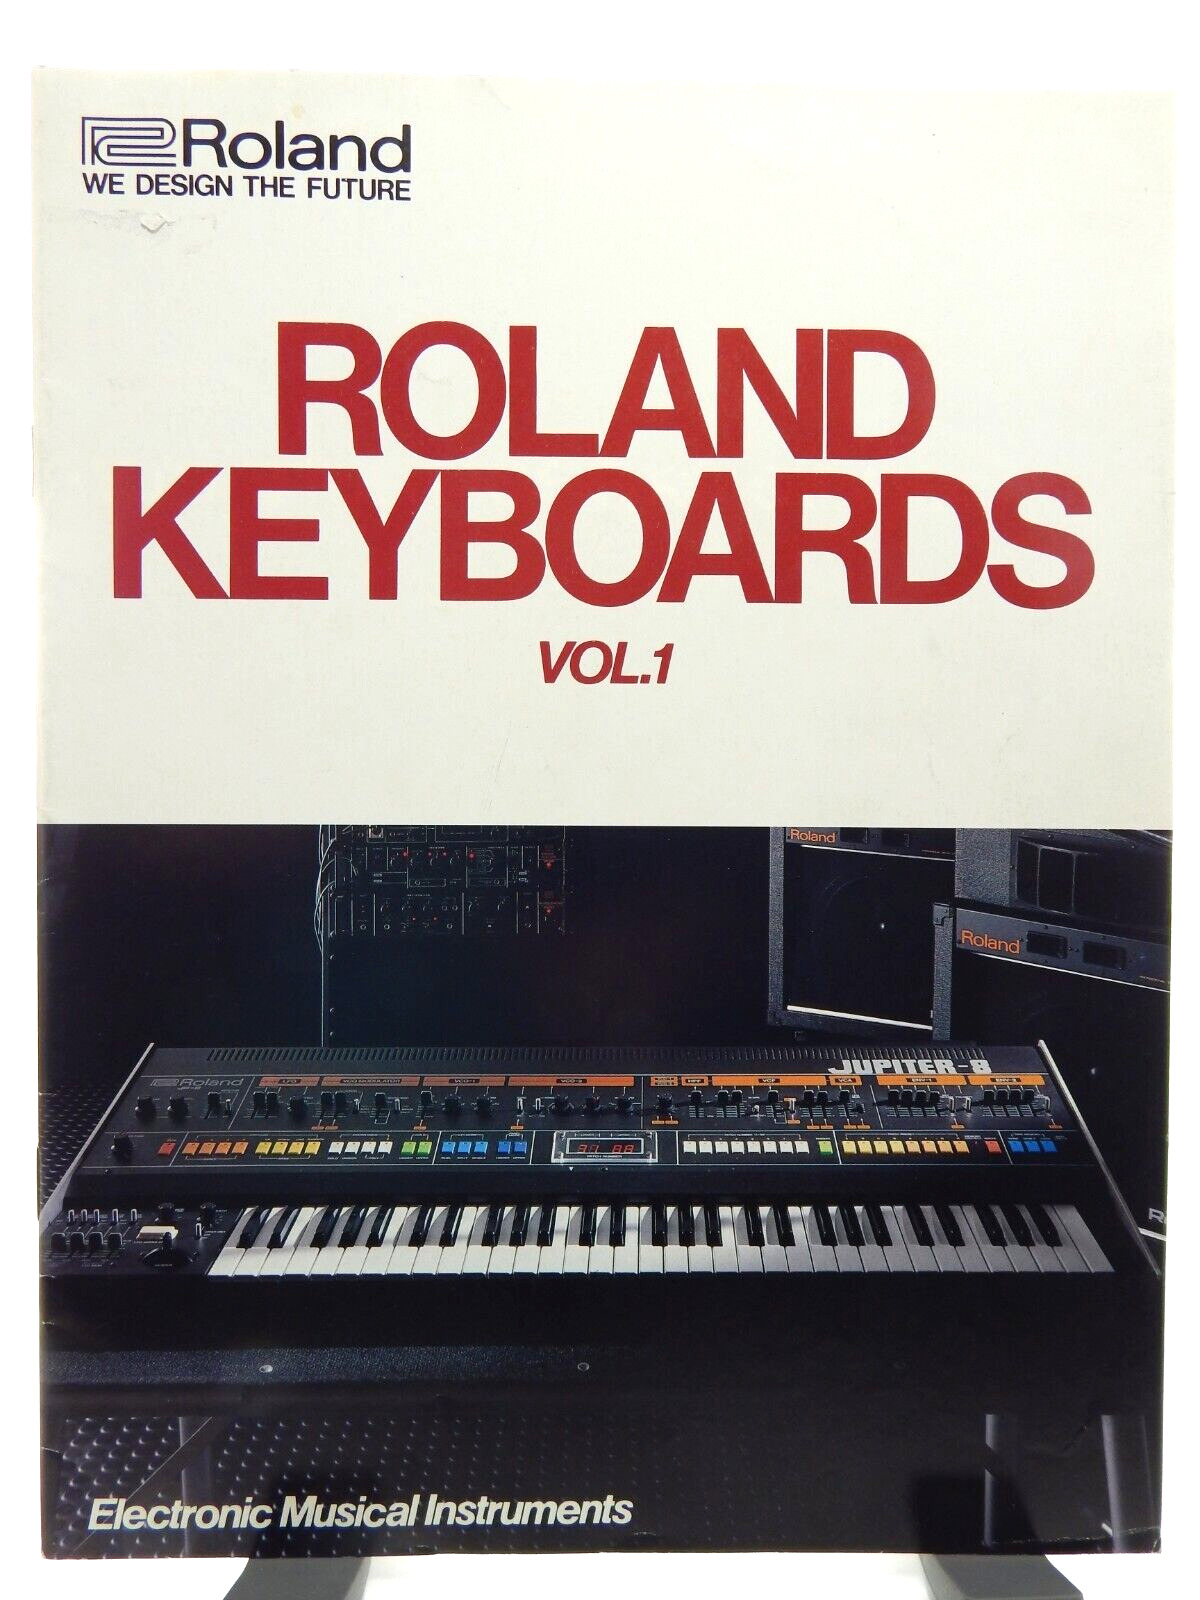 ROLAND SYNTHESIZER KEYBOARDS Vtg 1982 Vol 1 Catalog 30 Page Excellent Condition